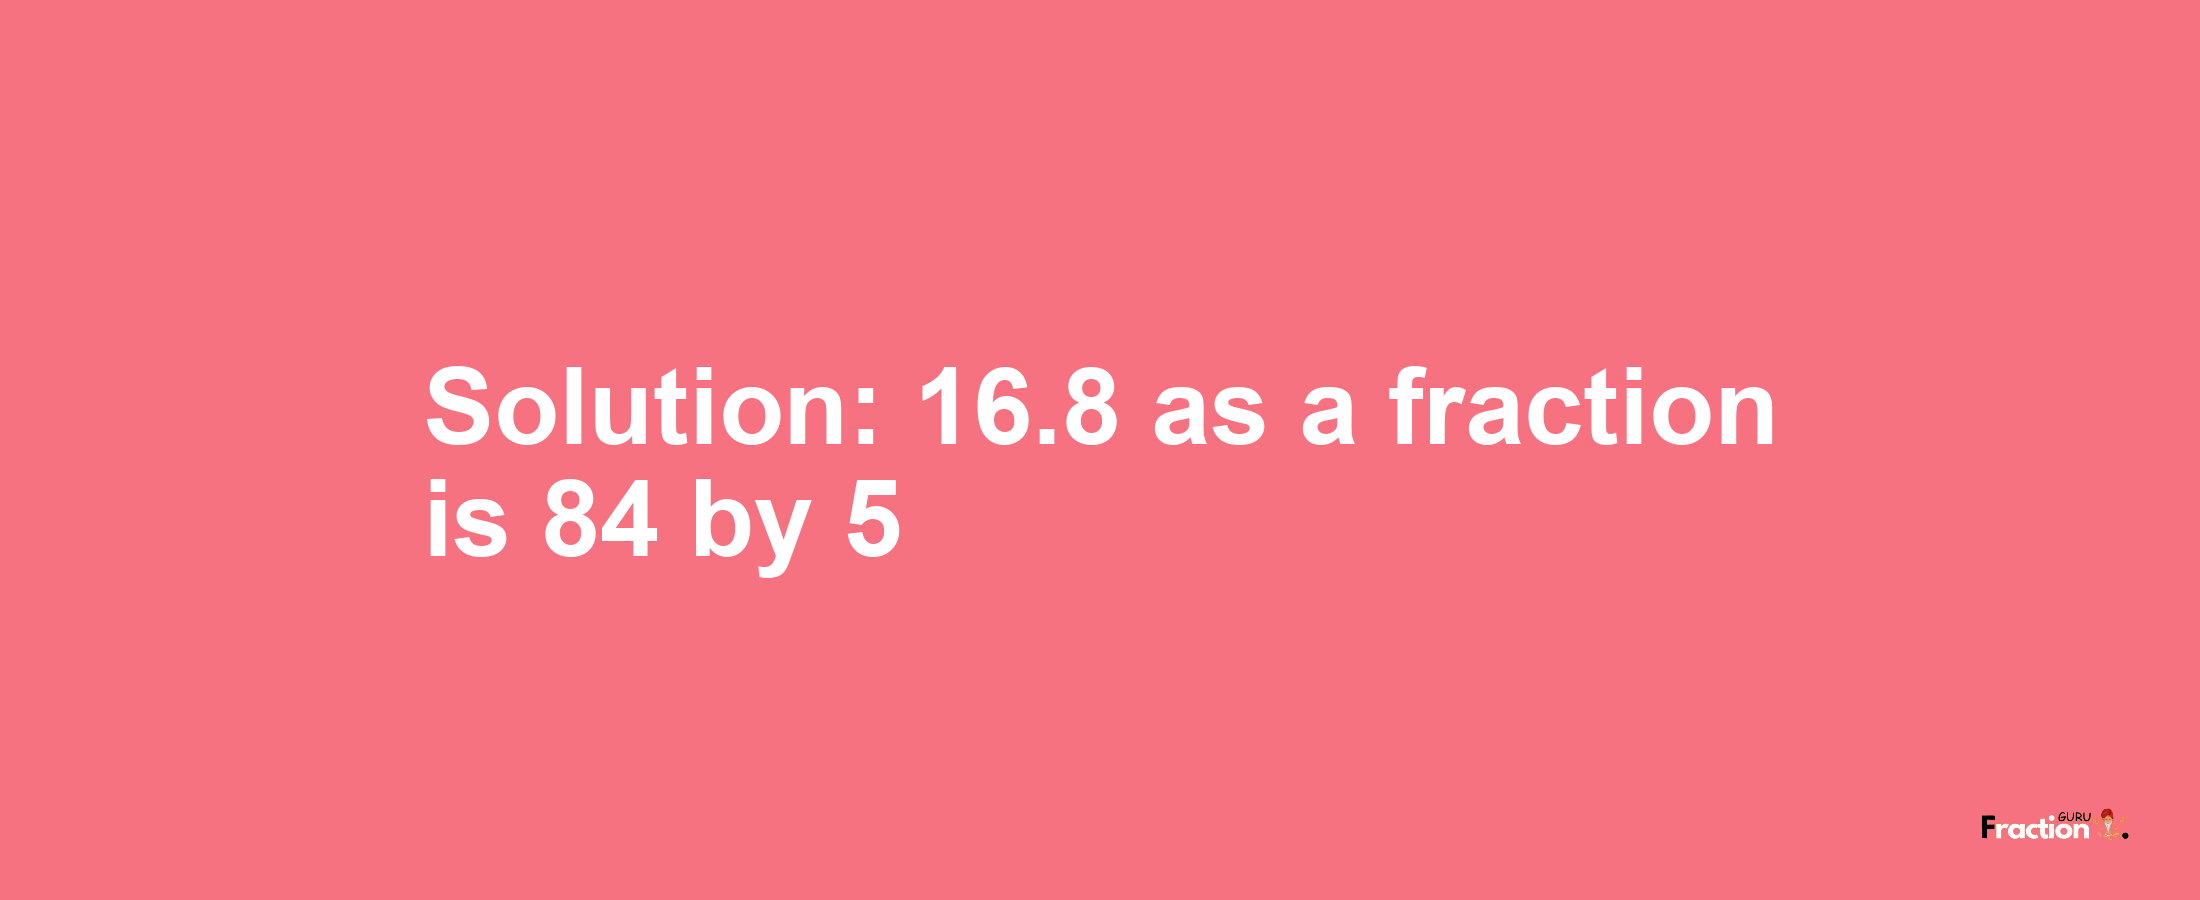 Solution:16.8 as a fraction is 84/5